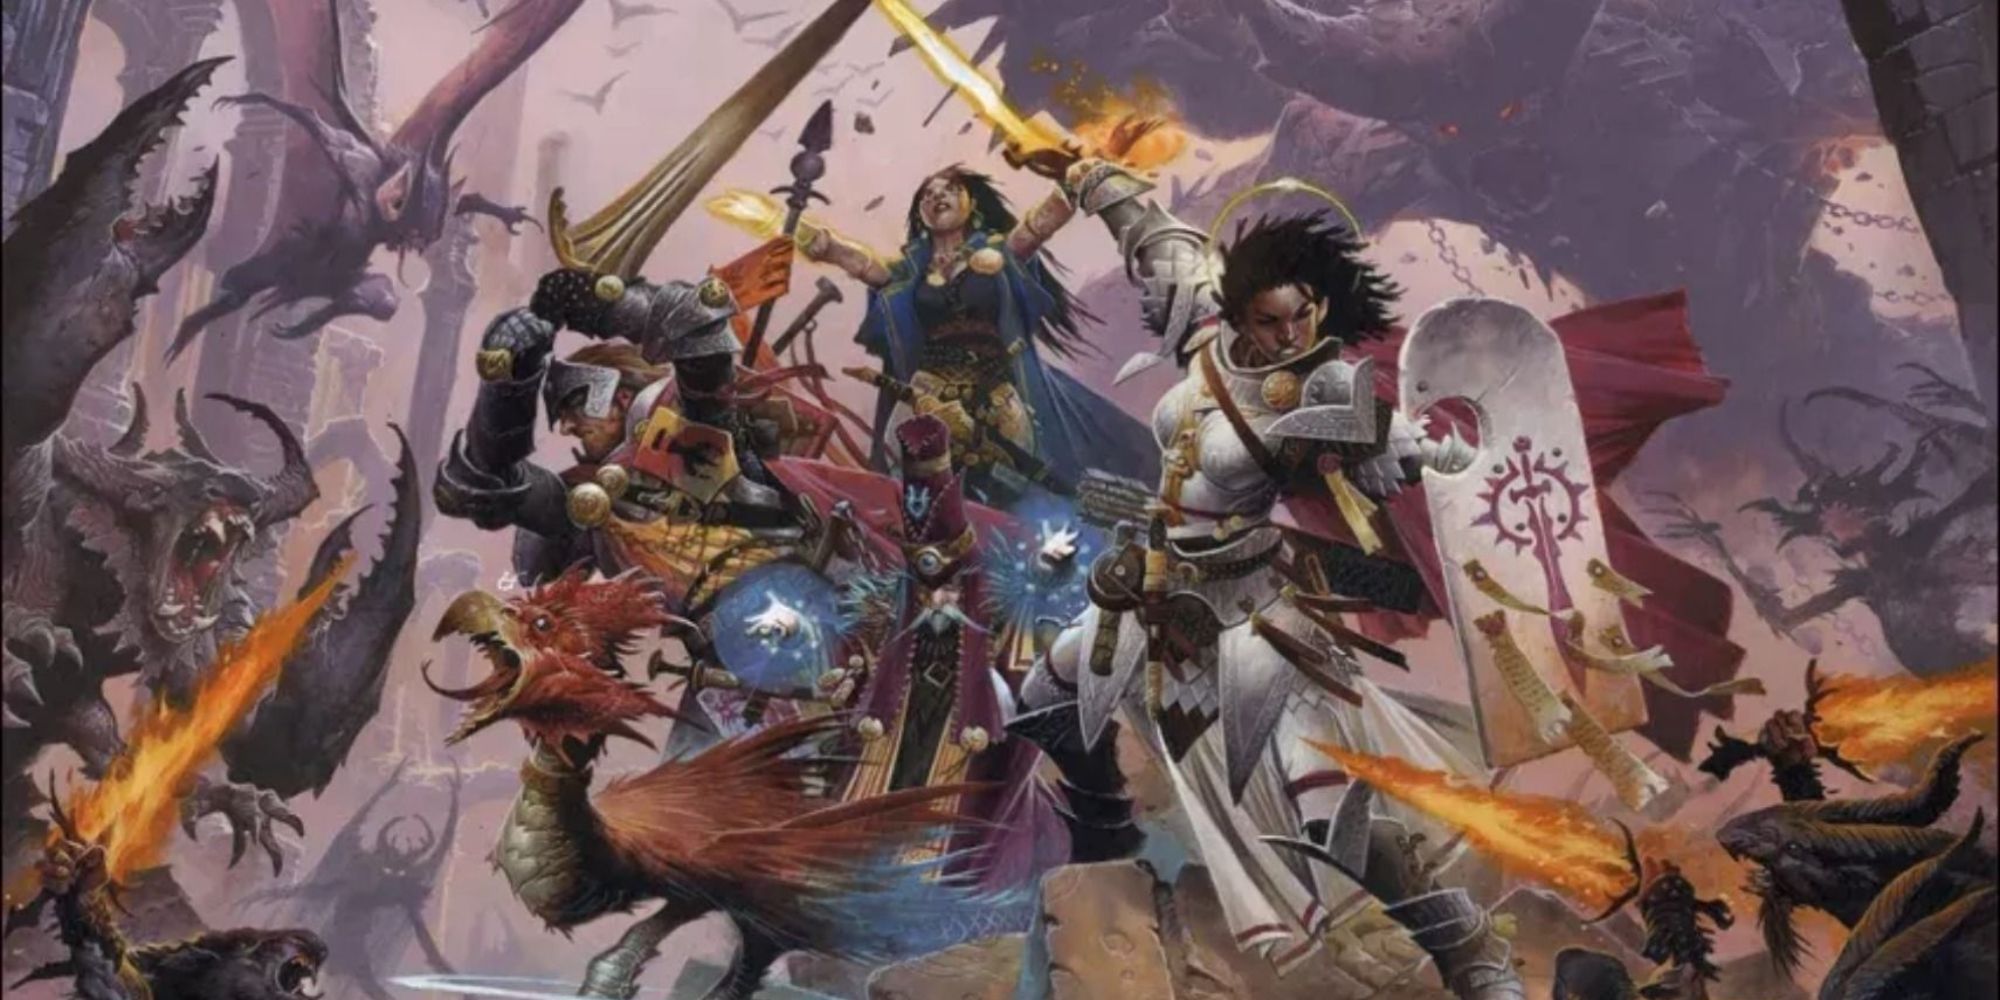 Pathfinder-Wrath-of-the-Righteous-Kickstarter-Goals-Cover